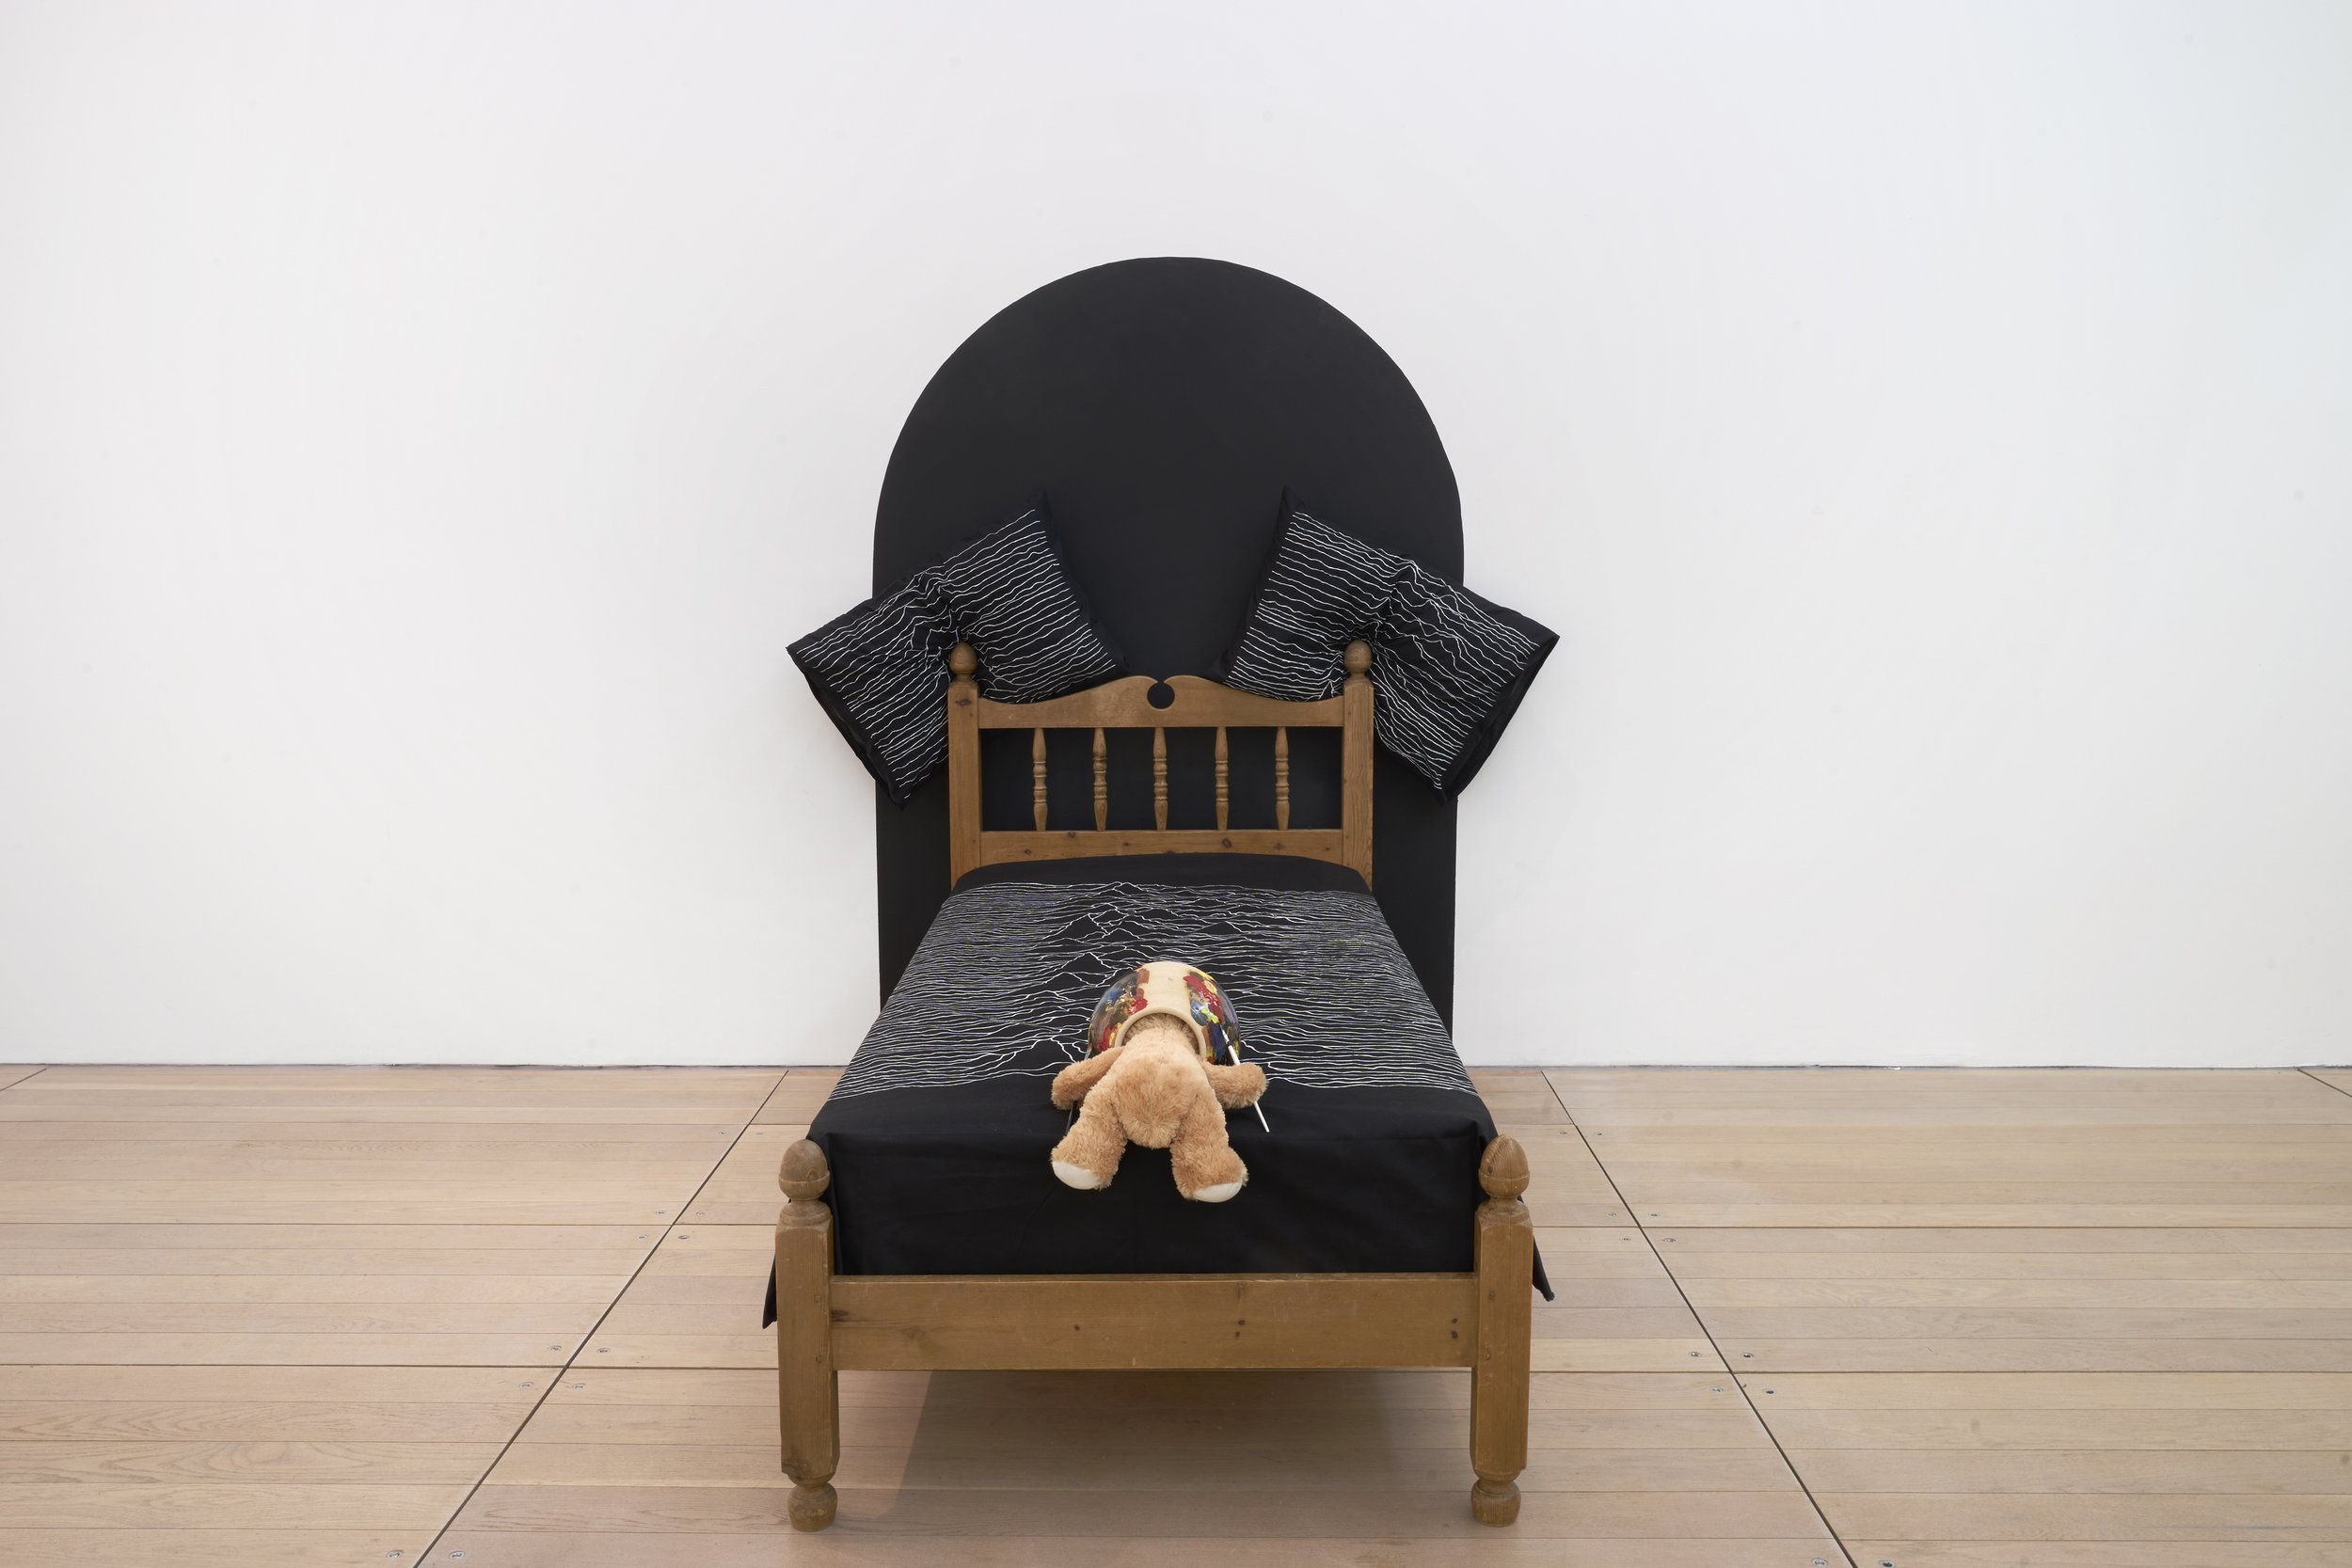 Well Known Pleasures, 2022, Wooden bed, Joy Division bed sheets, pillows and bear in ceramic pot, 204 x 100 cm, 80 x 40 in